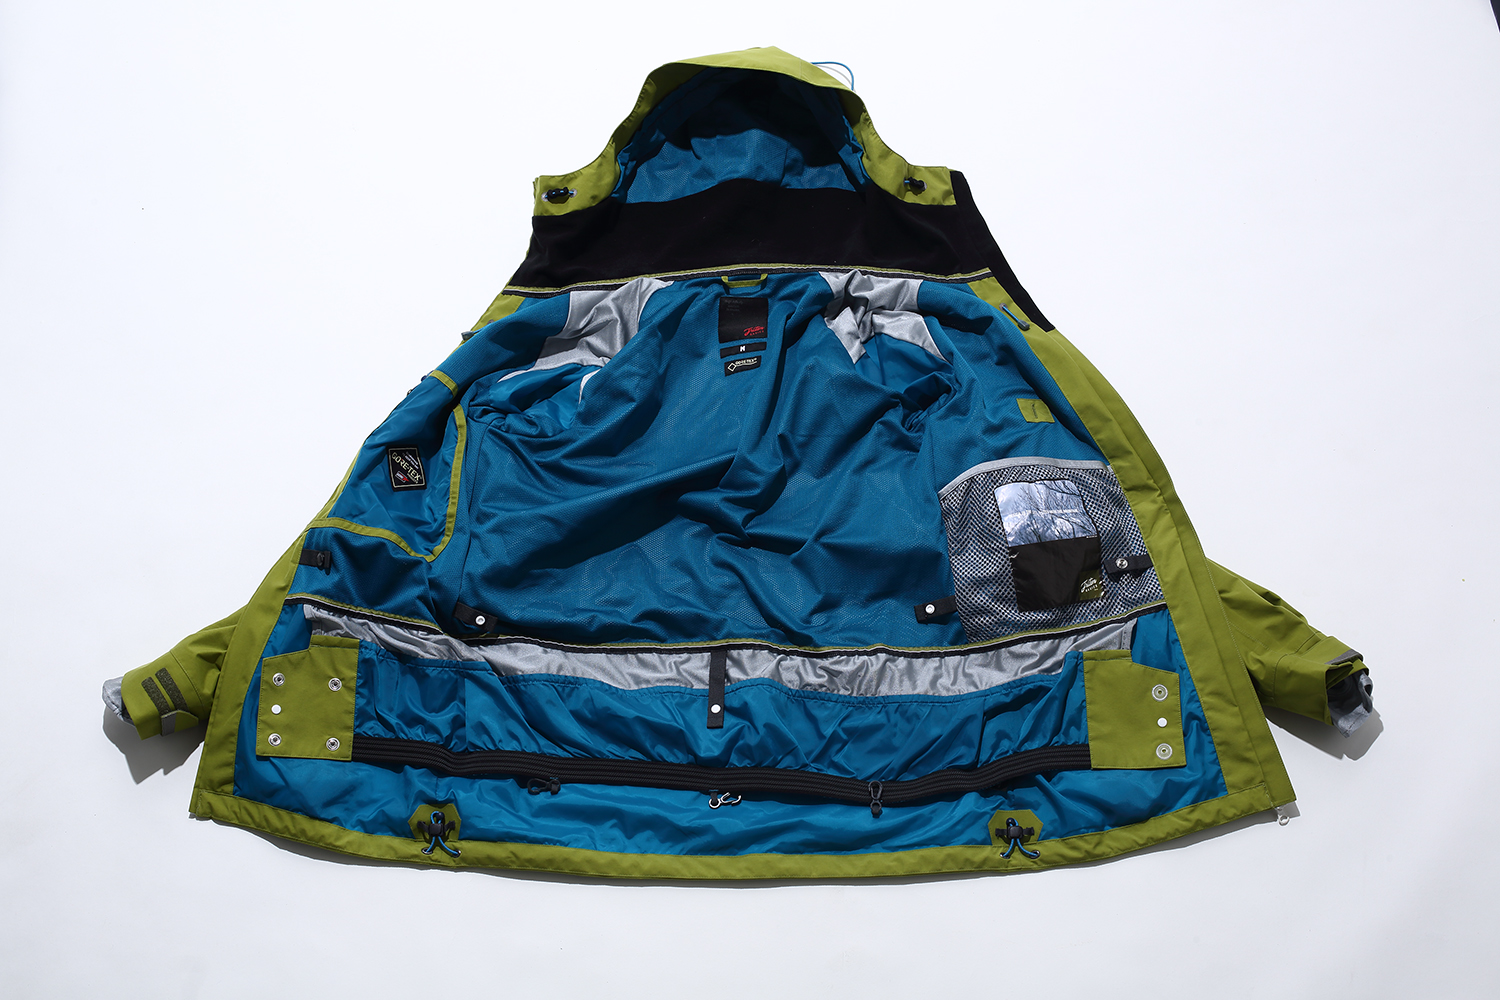 The inside of the garment is packed with brand know-how.Layout the best material in the best place.The pockets are also the easiest to use for snowboarders, and are in easy-to-use positions.